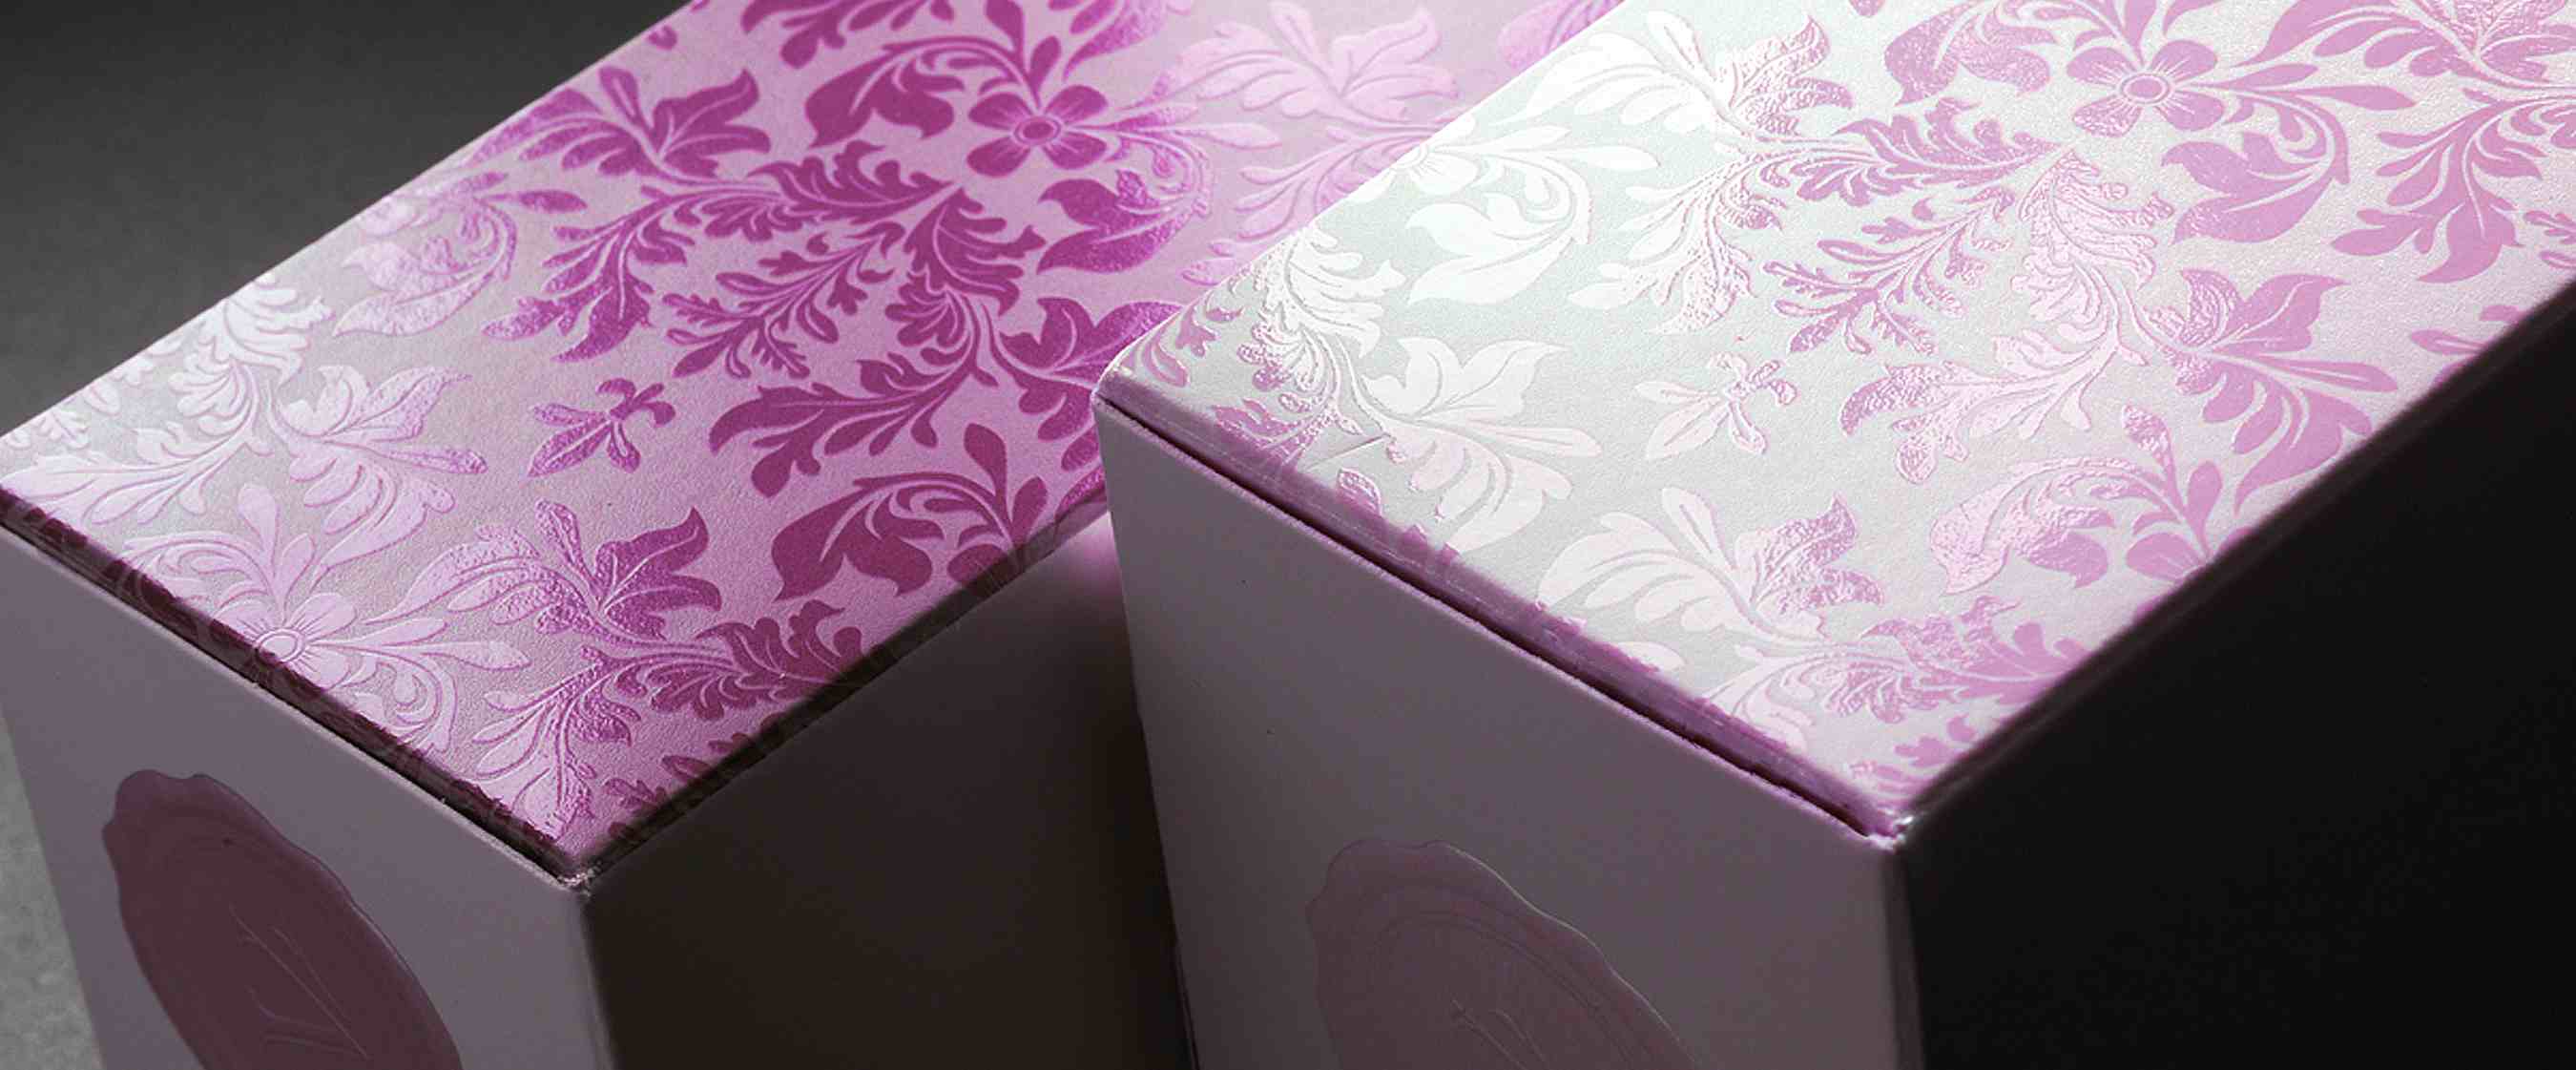 Magnify Luxury appearance with Coatings, Inks and Varnishes.